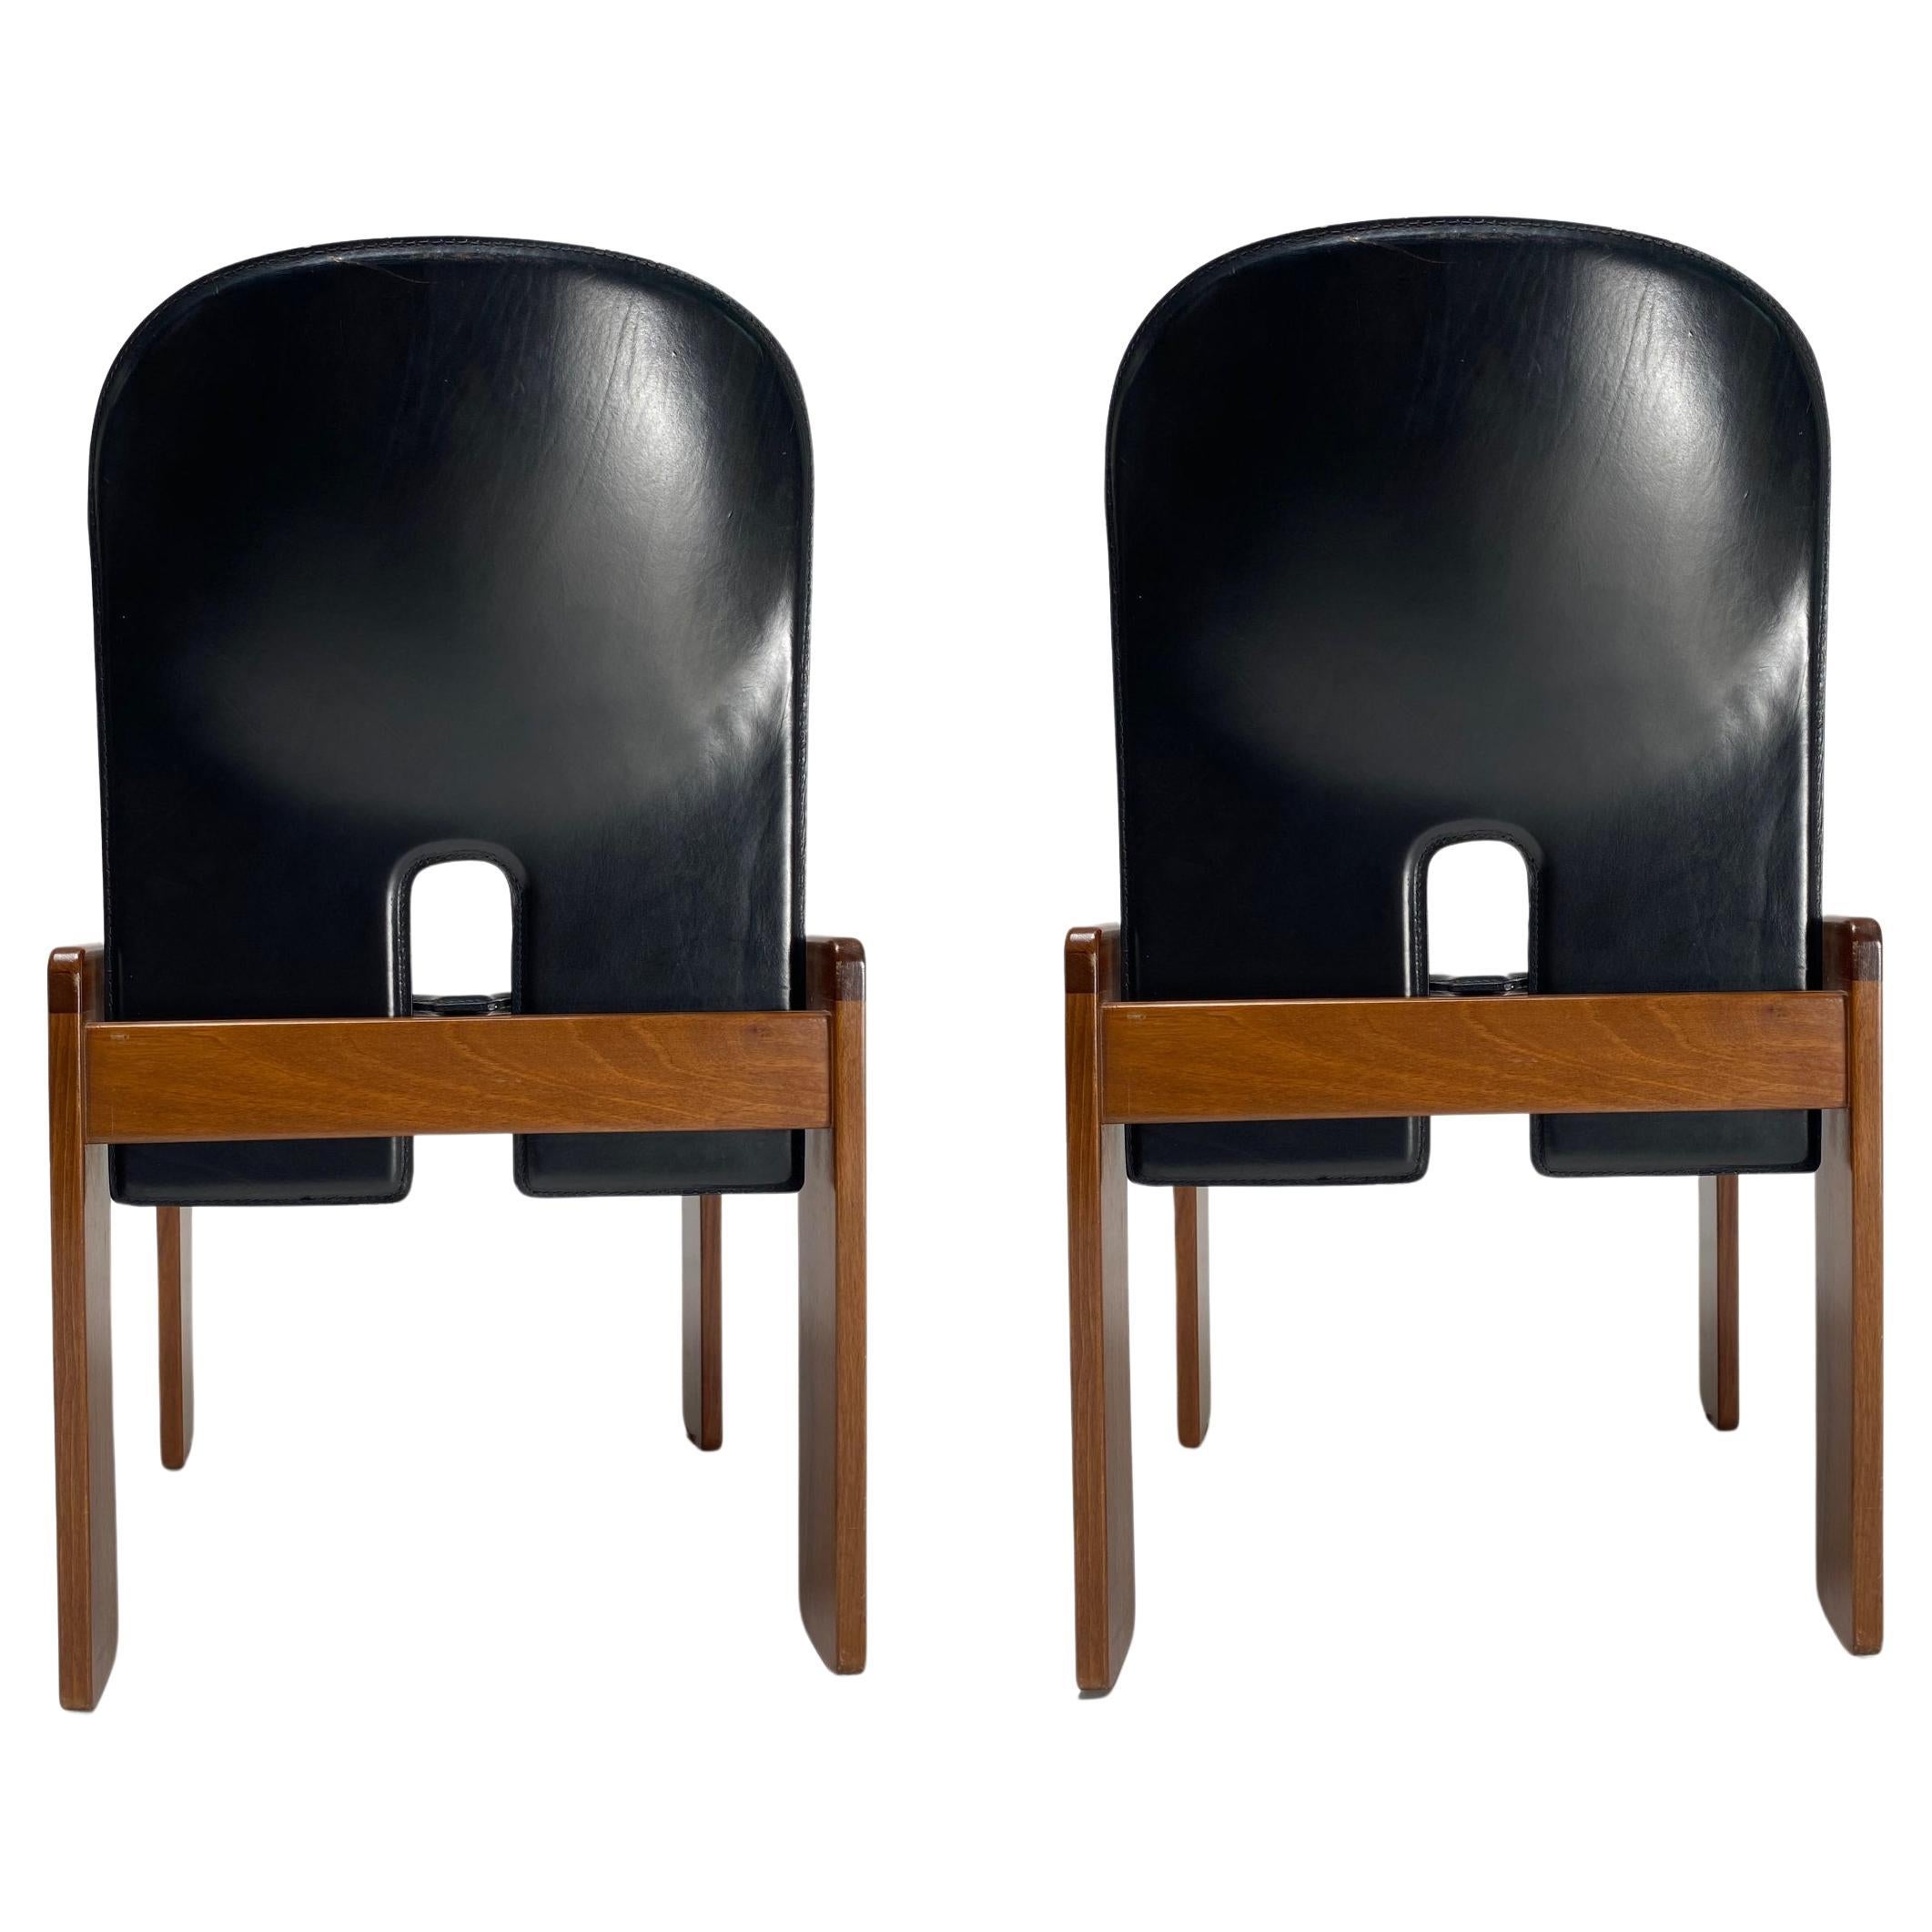 Set of 2 Black Leather "121" Chairs by Tobia Scarpa for Cassina, Italy, 1967 For Sale